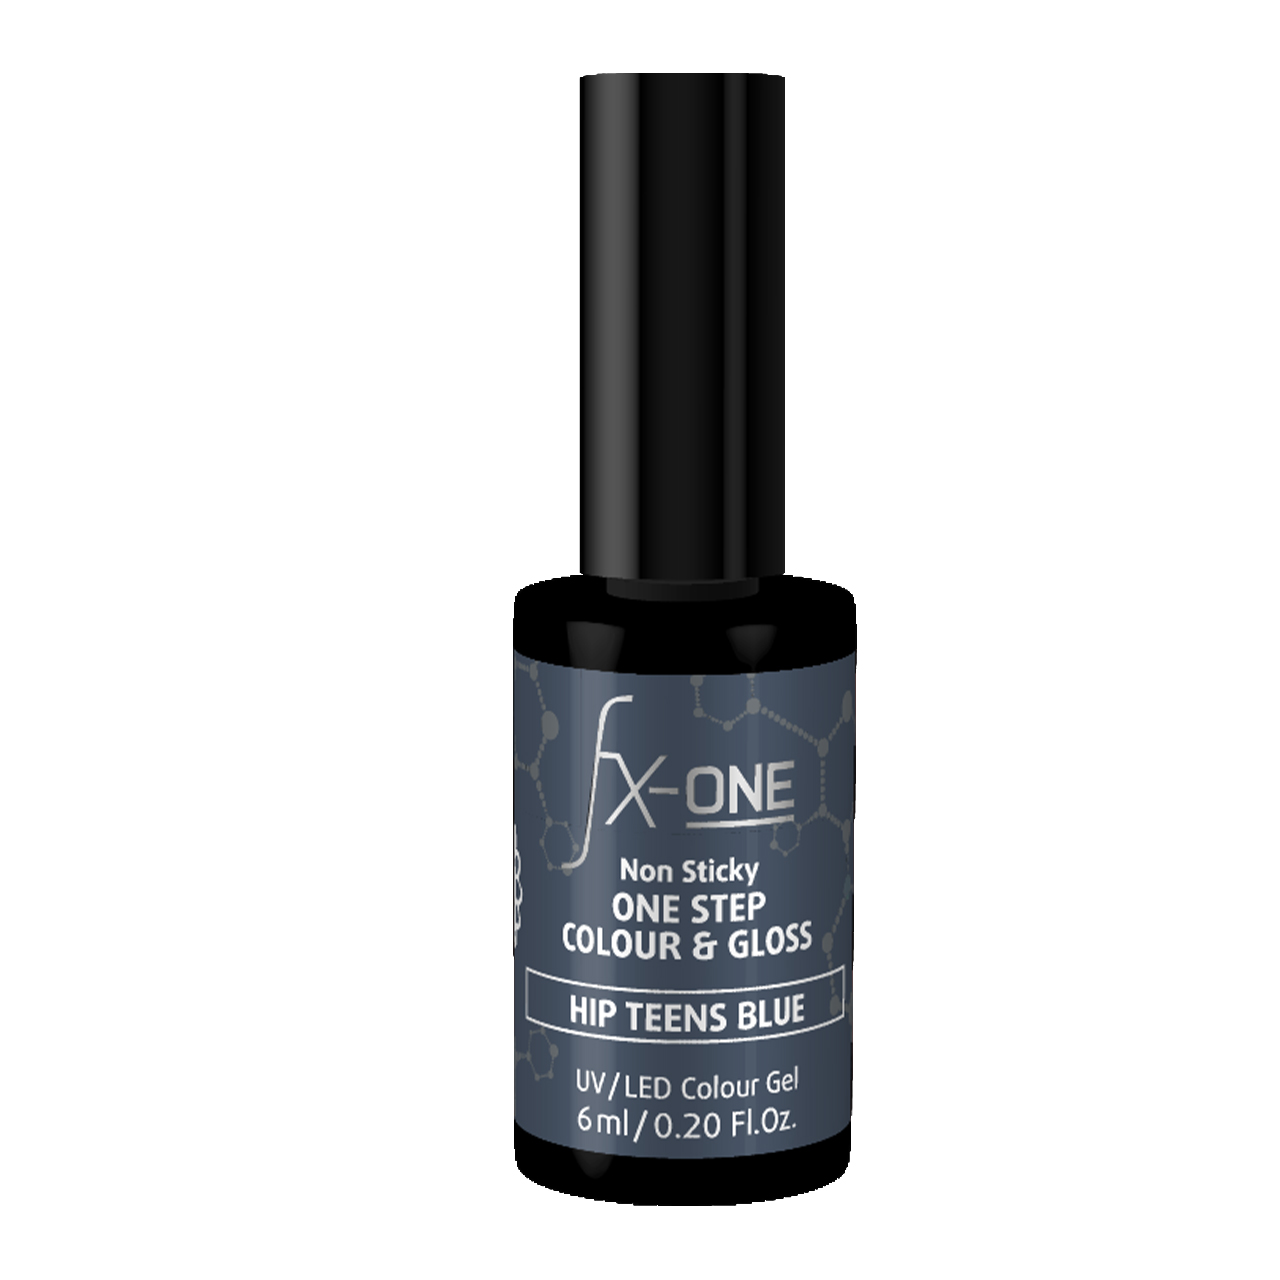 FX-ONE Colour & Gloss Blueberry | 02-939 6ml | Muffin Blueberry Muffin